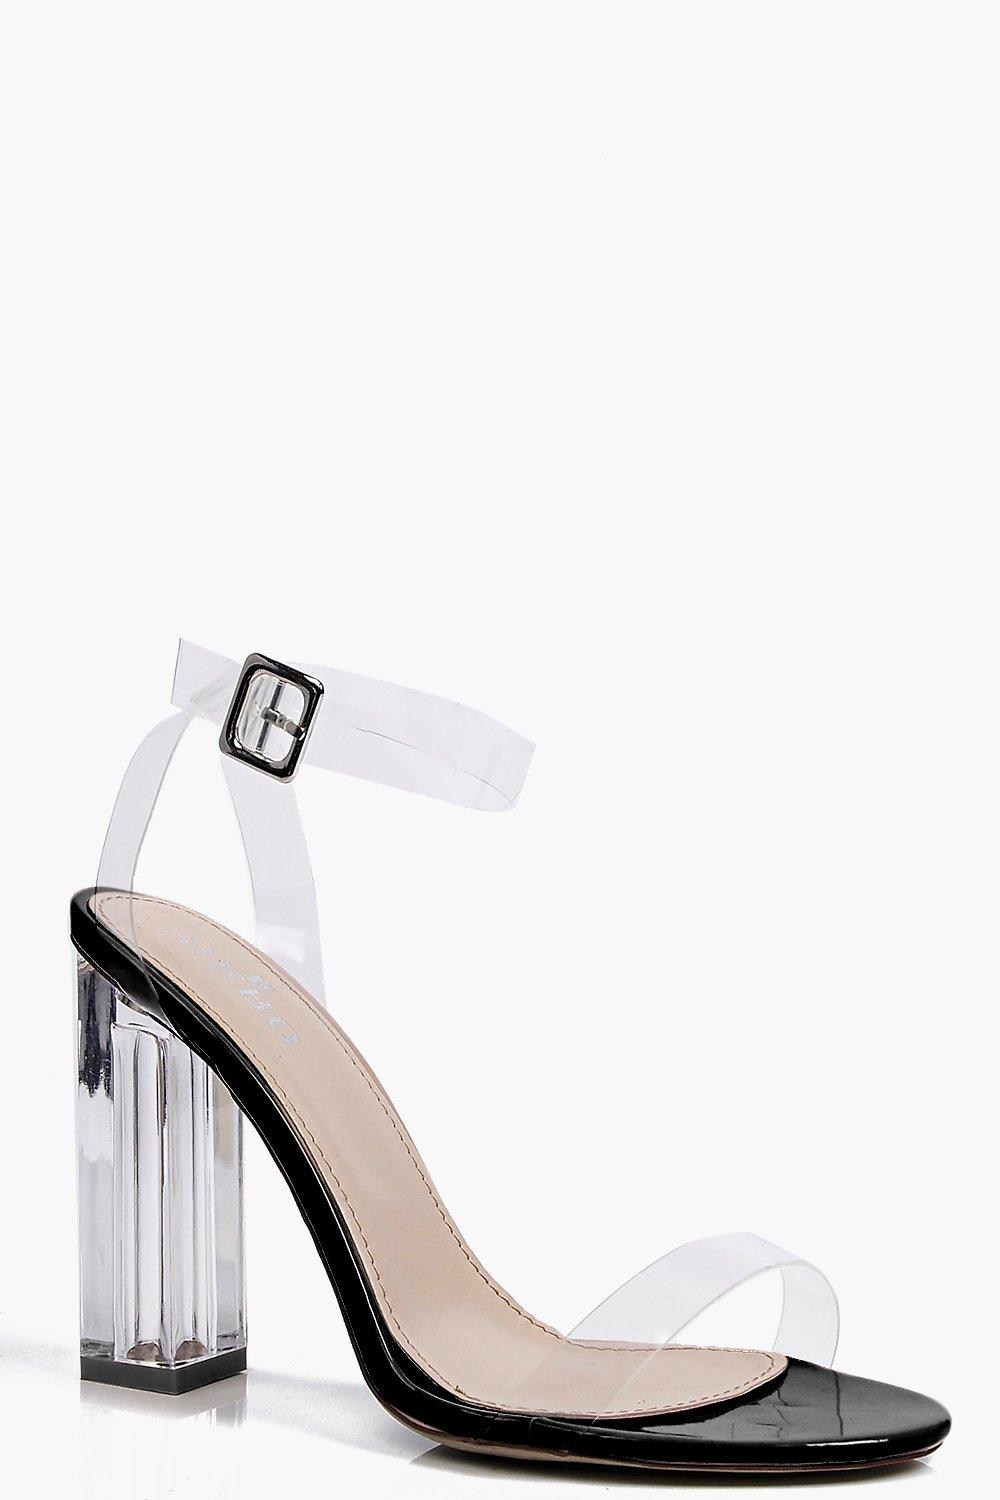 vince camuto white sandals